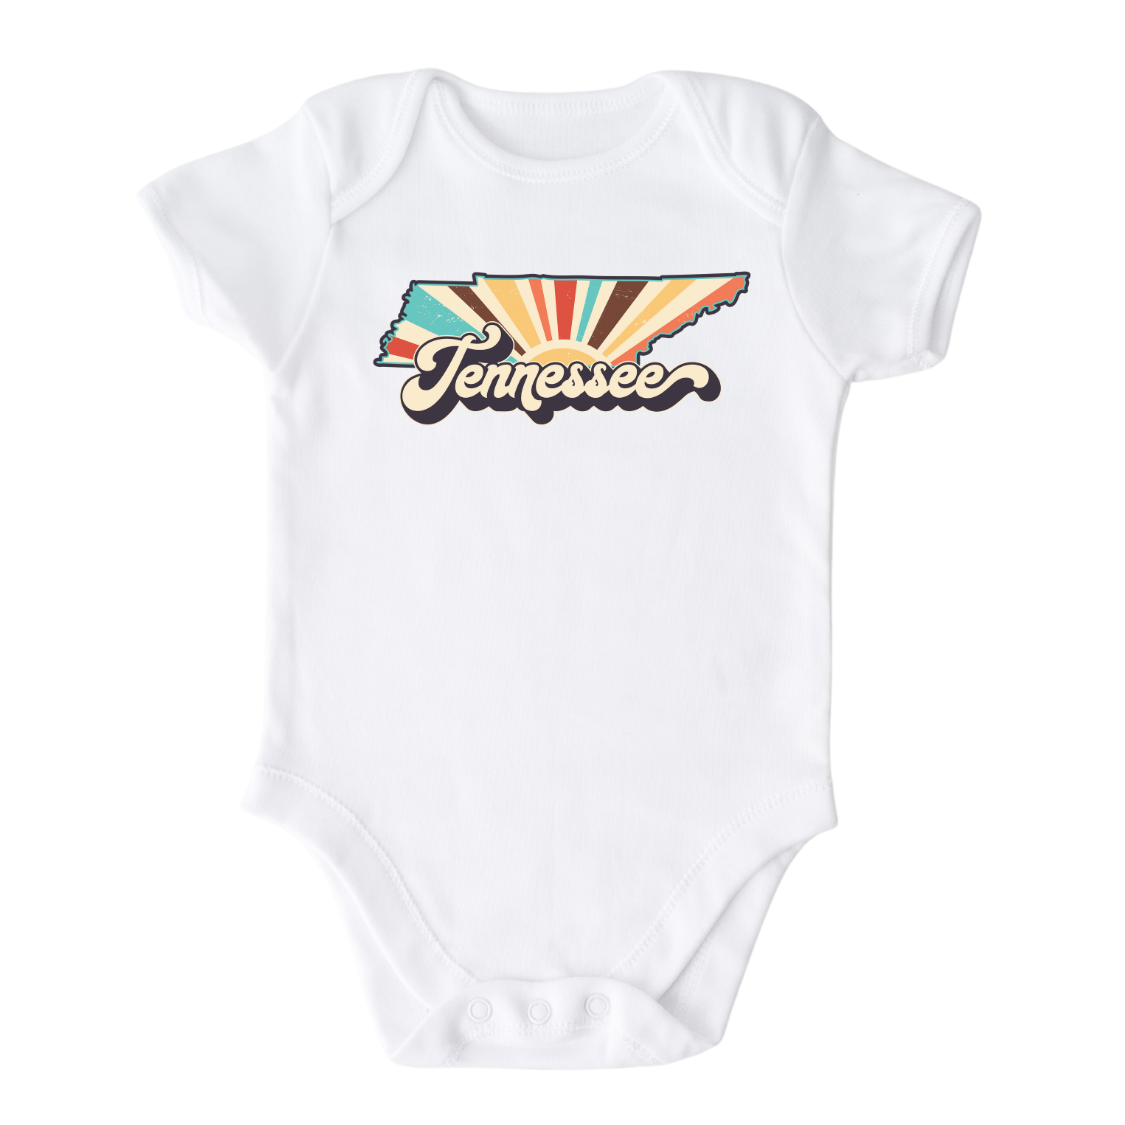 Tennessee Baby Onesie® Tennessee State Shirt for Kids Tshirt Tennessee Bodysuit for Baby Gift 1128